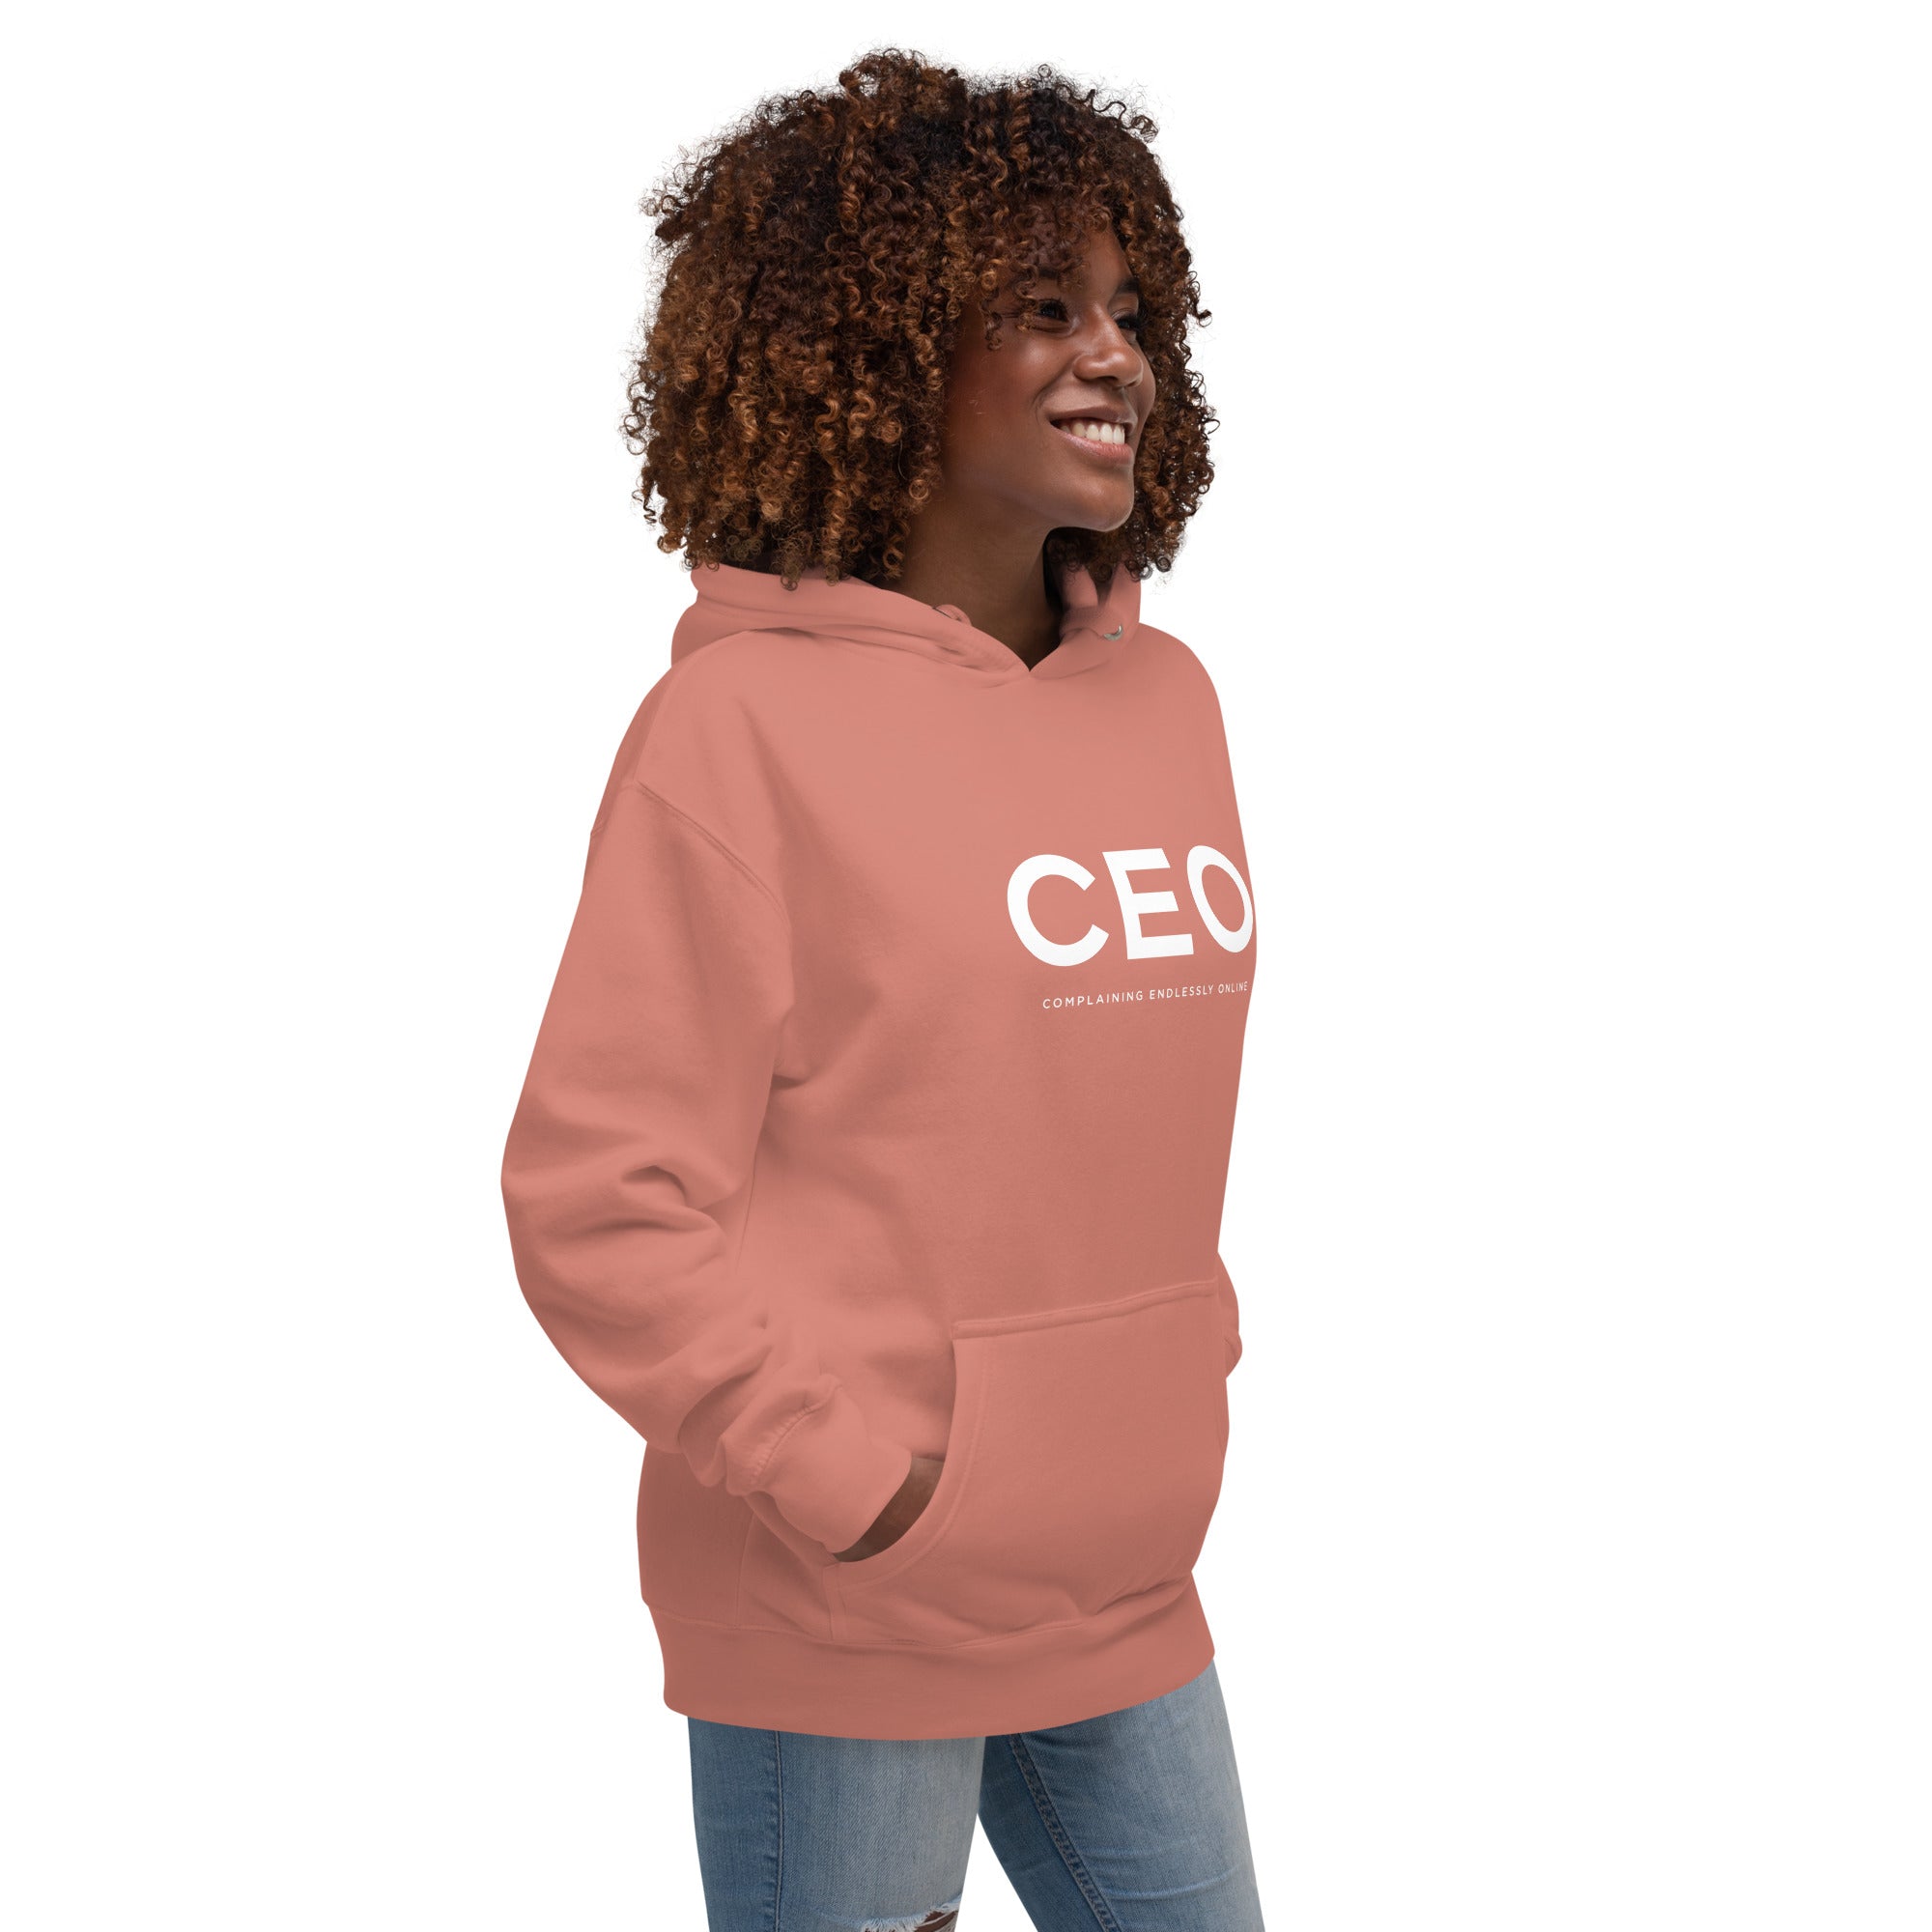 Complaining Endlessly Online – Unisex Hoodie